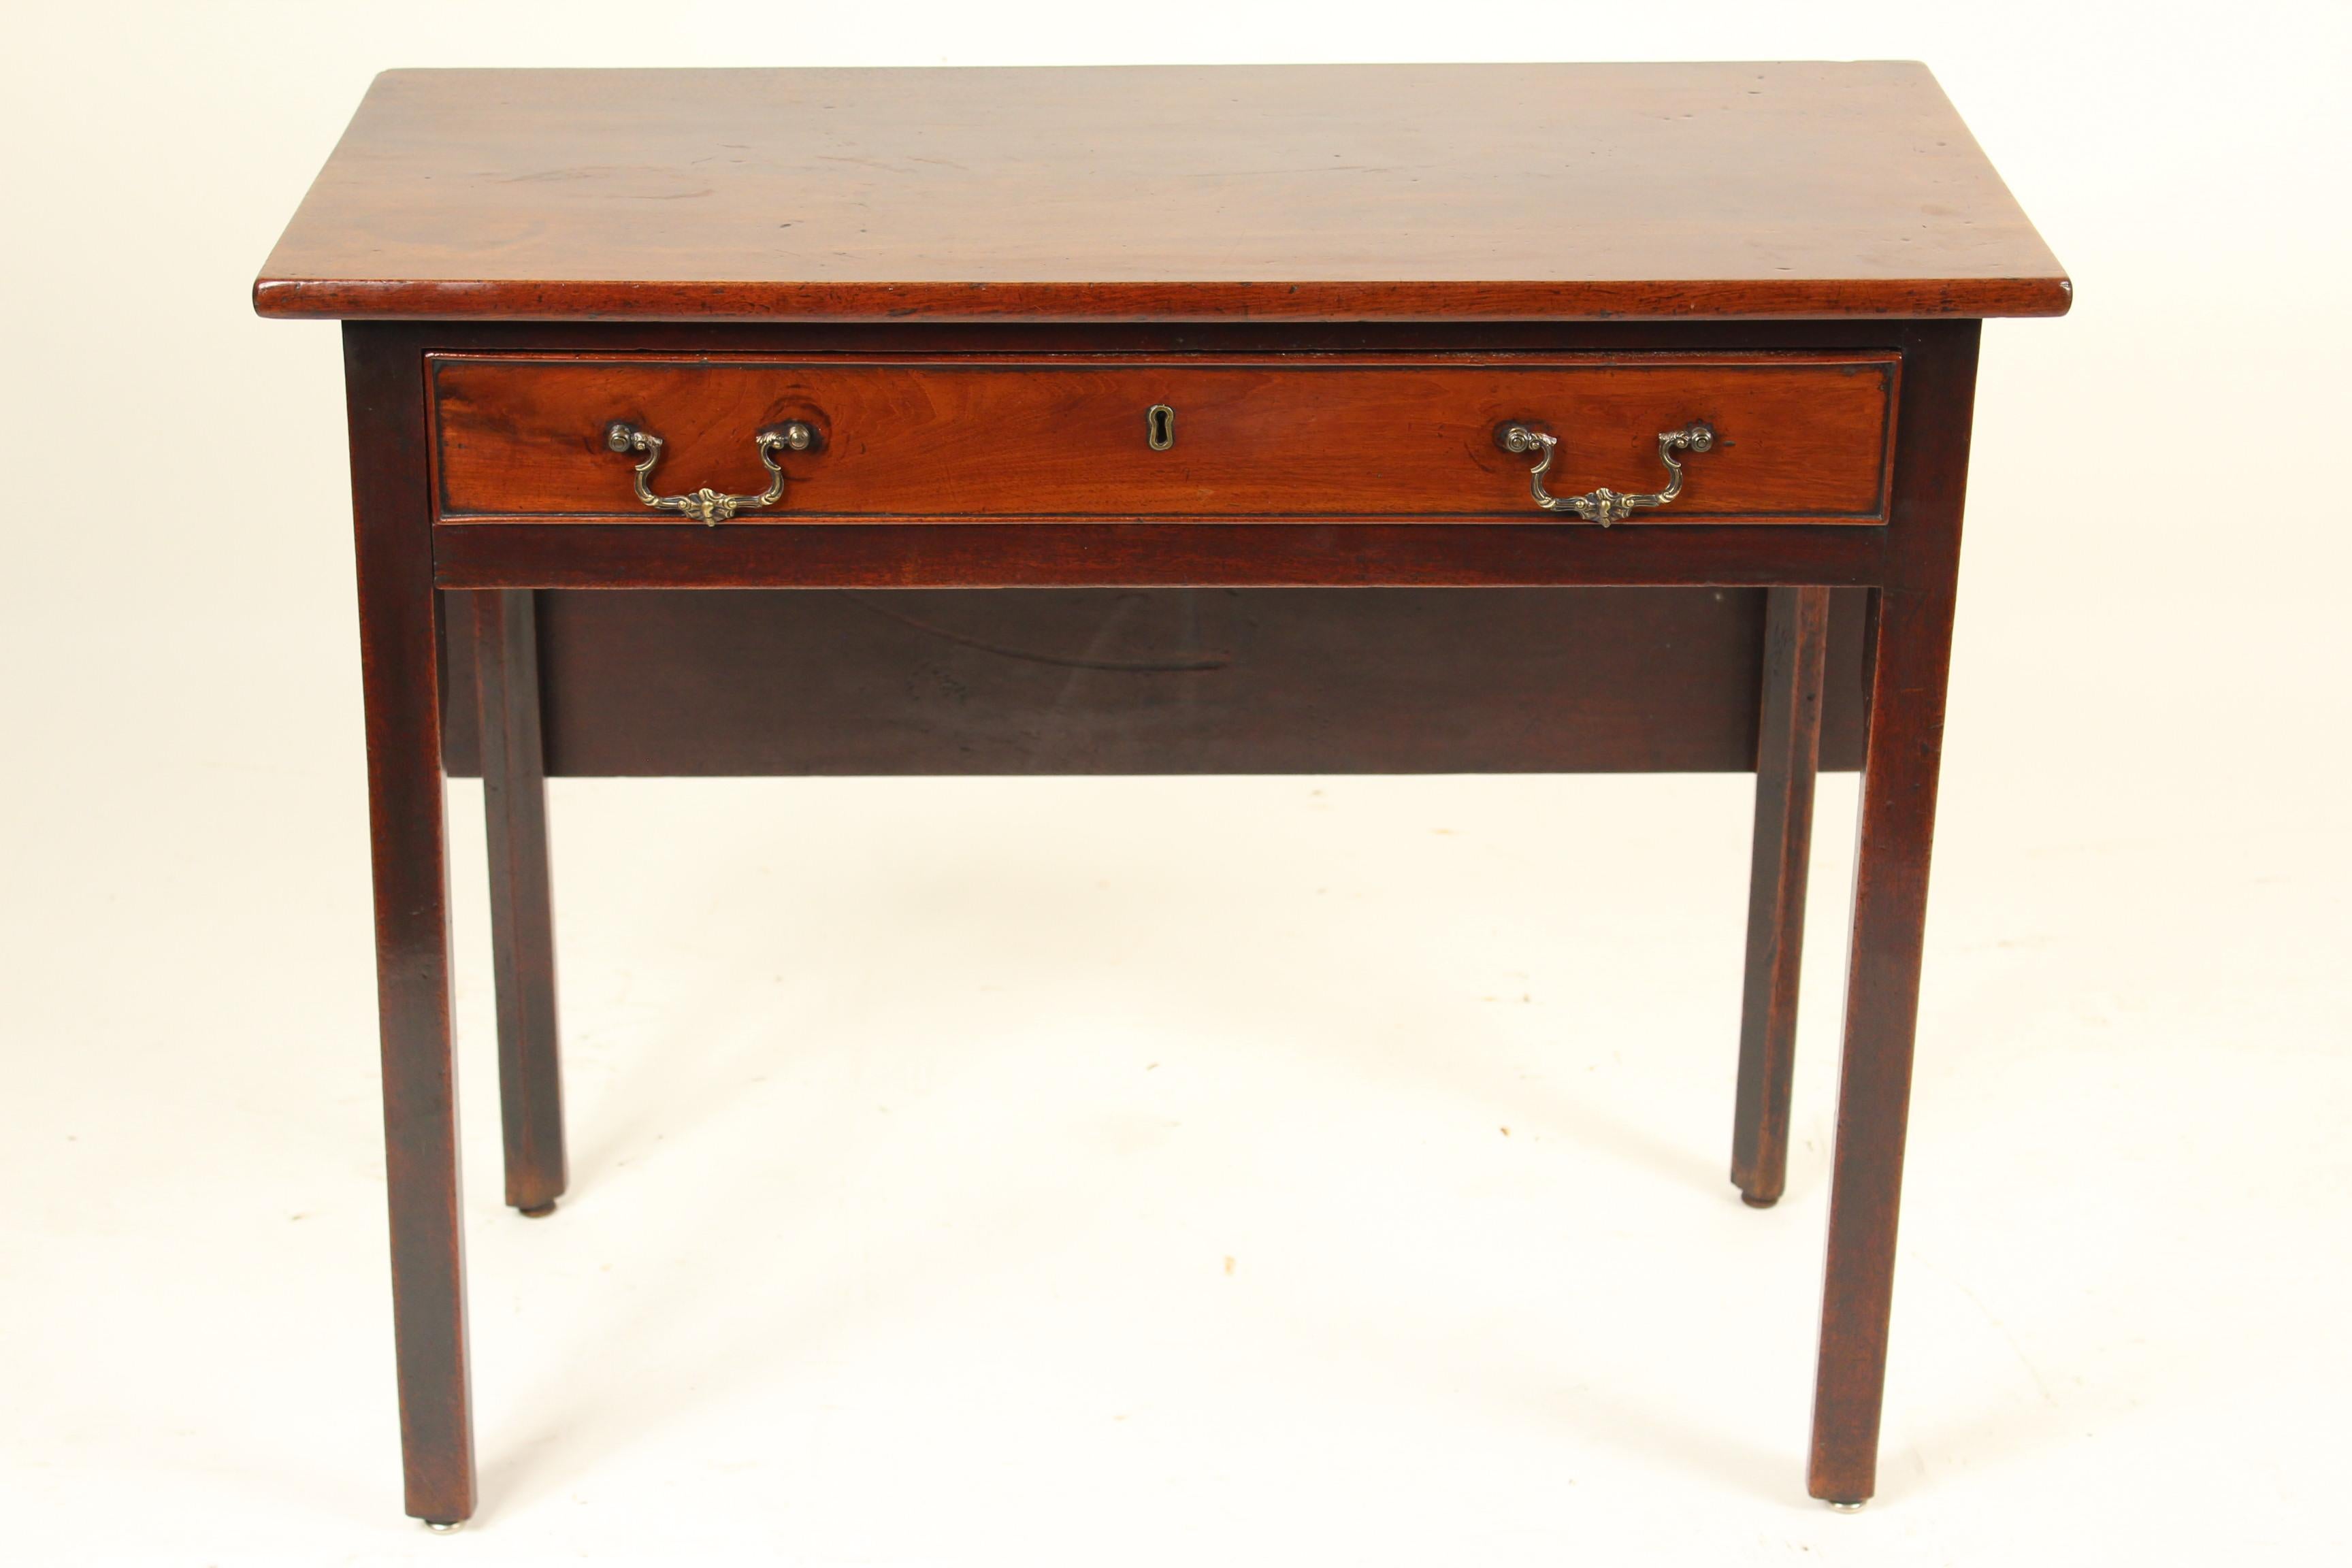 George II mahogany drop leaf games / side table, circa 1760. This is very versatile table can be used as a games table, side table or a lowboy. Both the top and drop leaf are single board slabs of mahogany with excellent color. The legs are 5 sided.